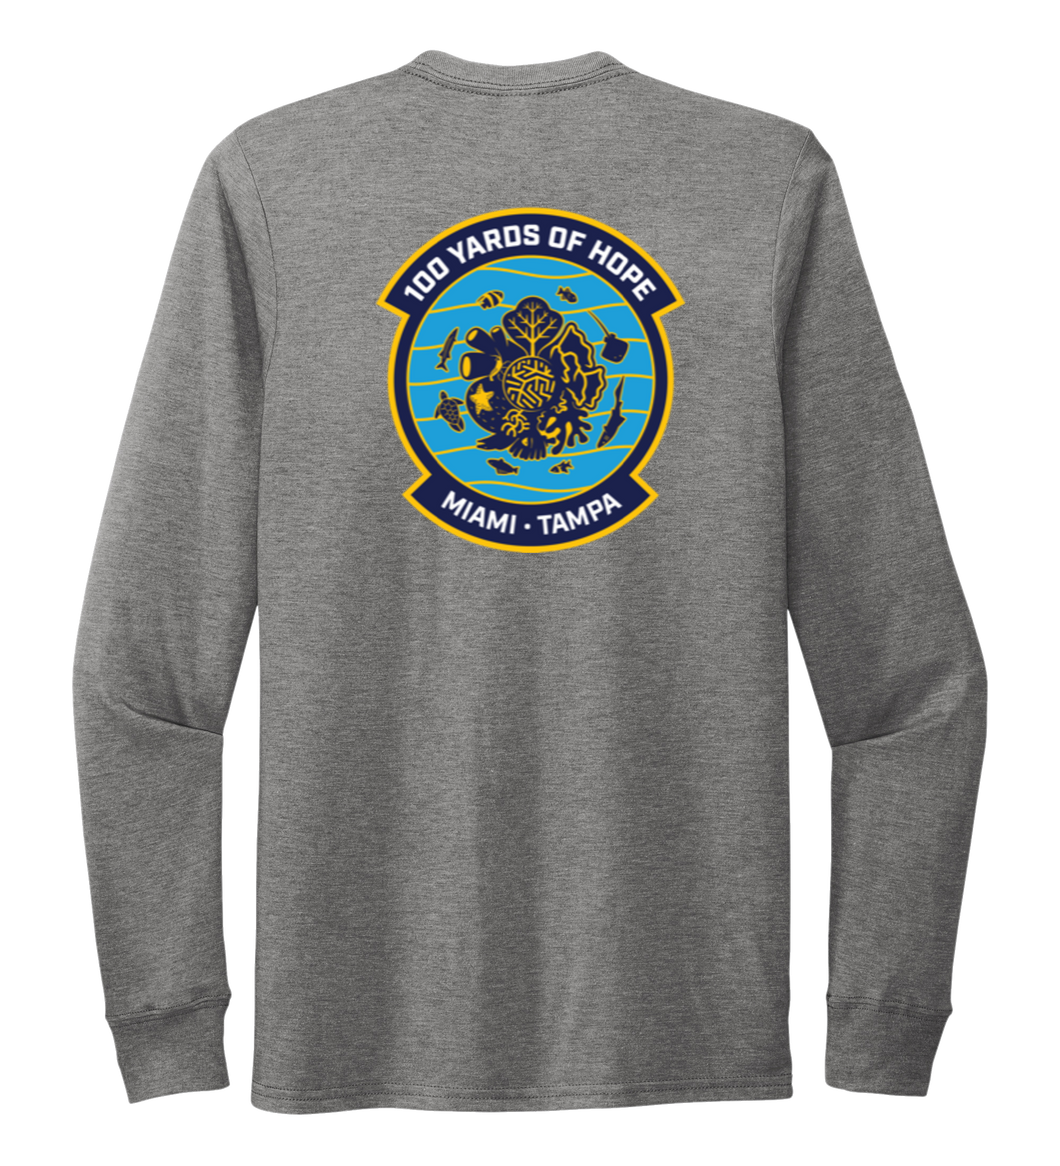 FORCE BLUE 100 YARDS OF HOPE Unisex Crew Neck Long Sleeve T-shirt in Oyster Grey